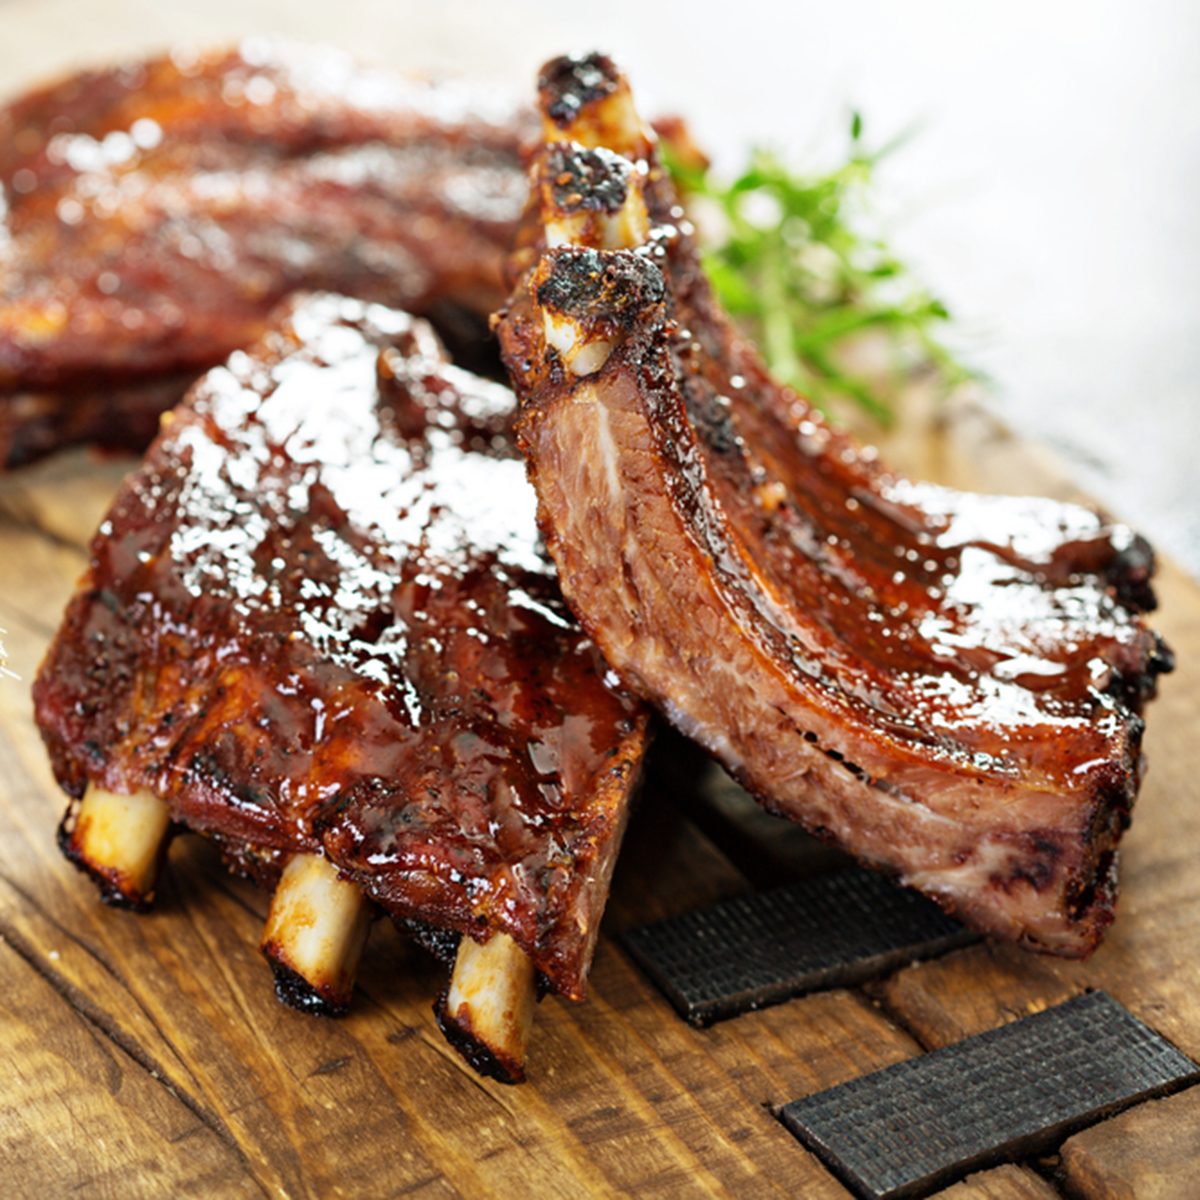 Grilled and smoked ribs with barbeque sauce on a carving board